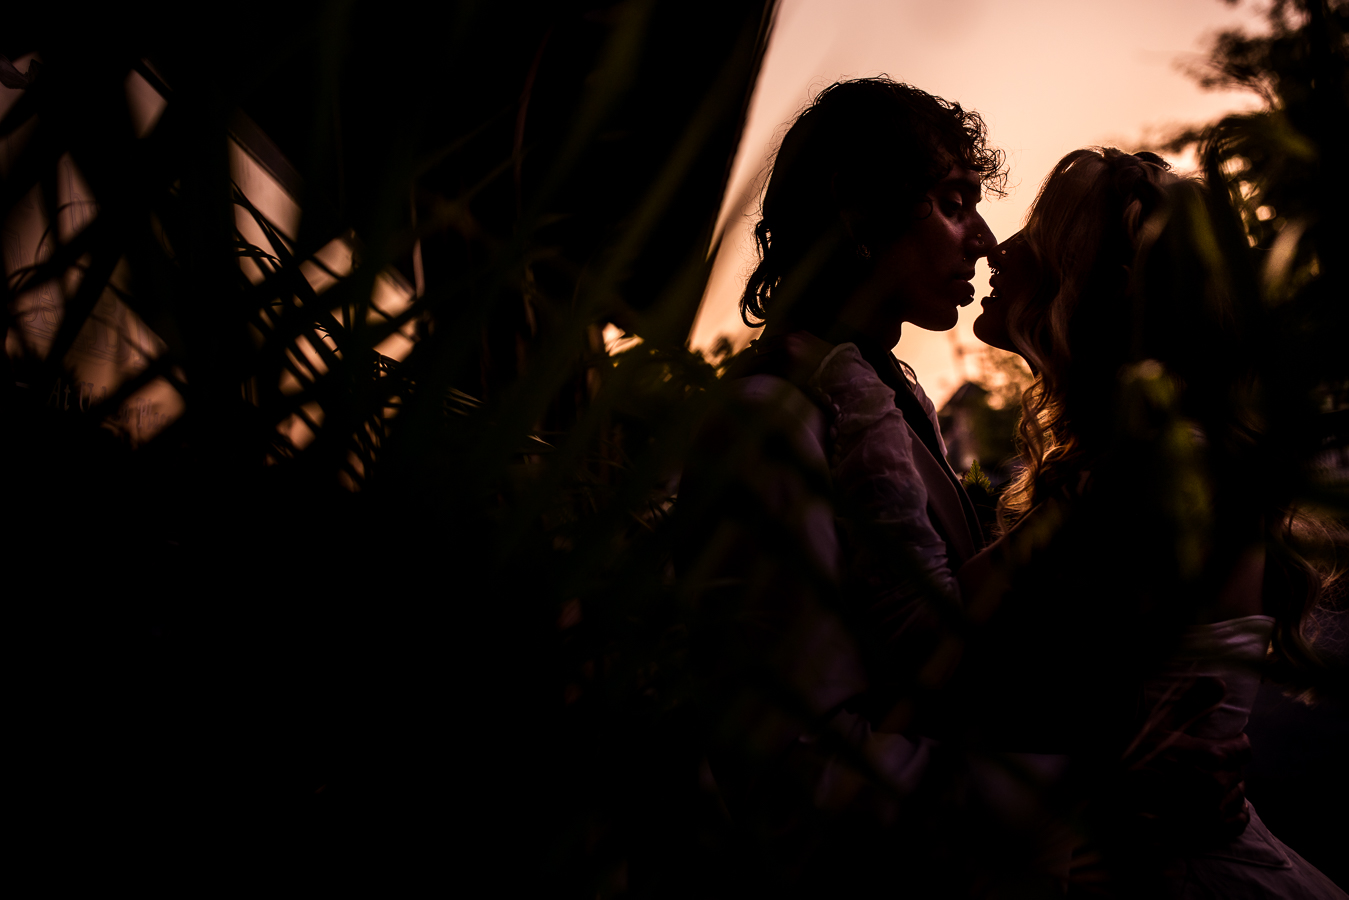 Cork Factory Hotel Wedding Photographer, lisa rhinehart, captures this stunning sunset image of the bride and groom almost sharing a kiss surrounded by outdoor greenery 